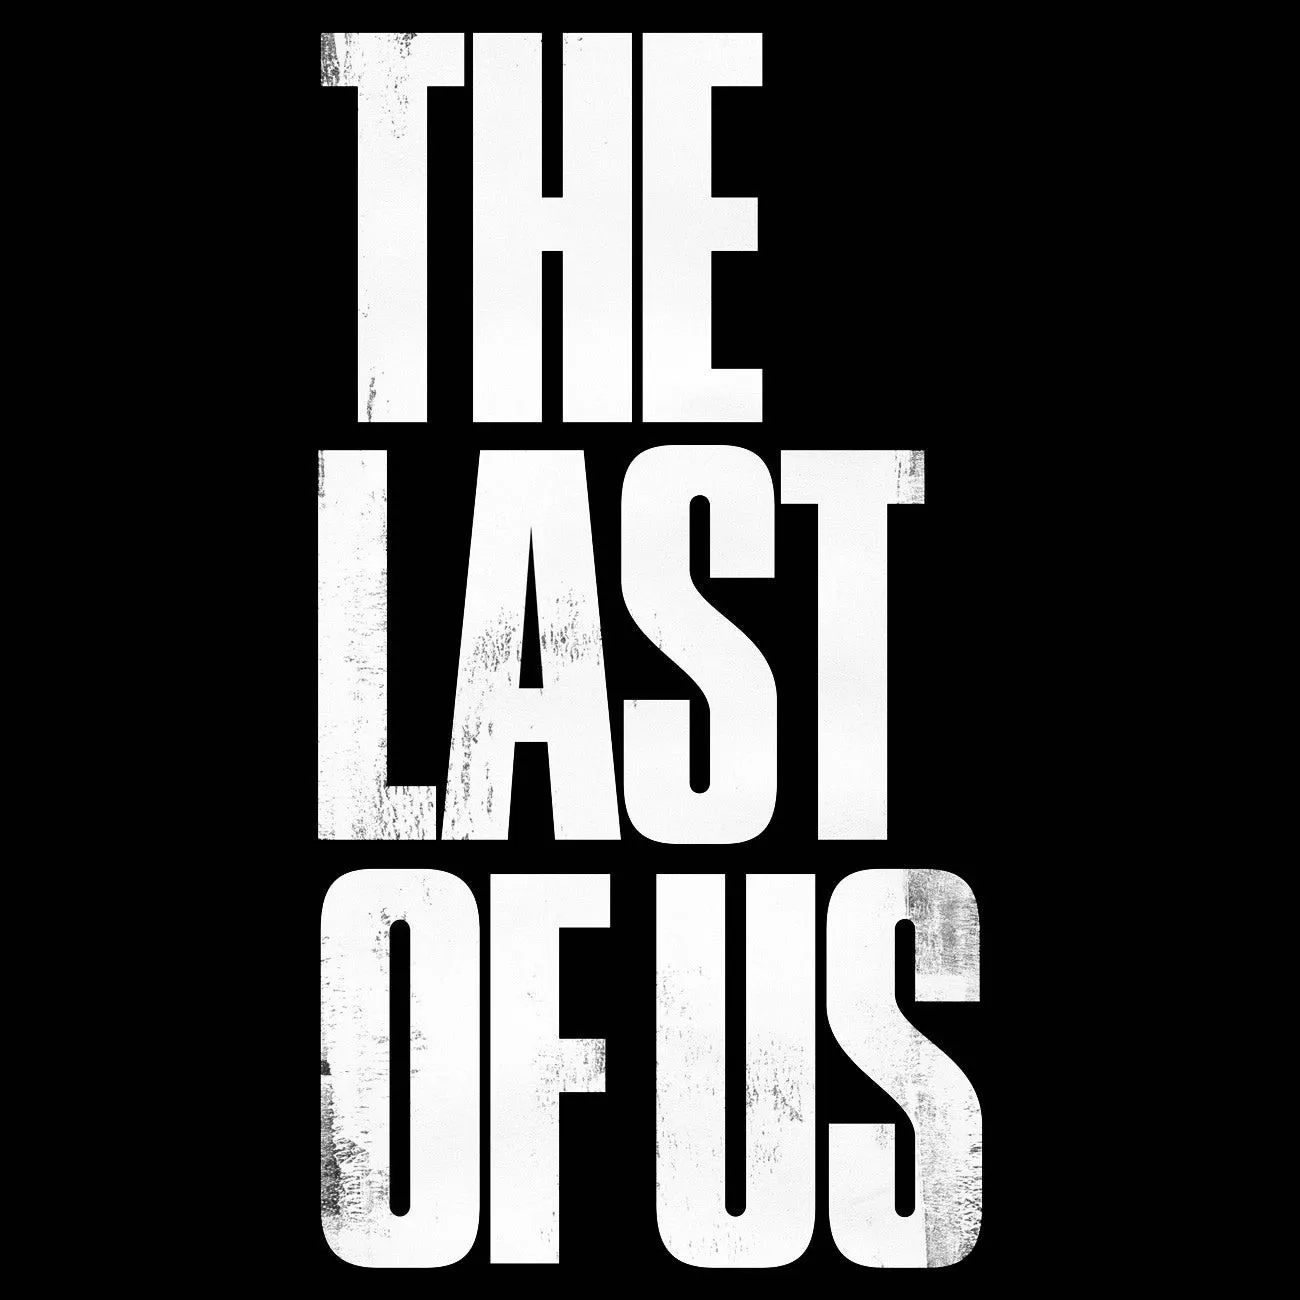 HBO's live-action version of 'The Last of Us' set to go live on January 15, 2023 | FMV6